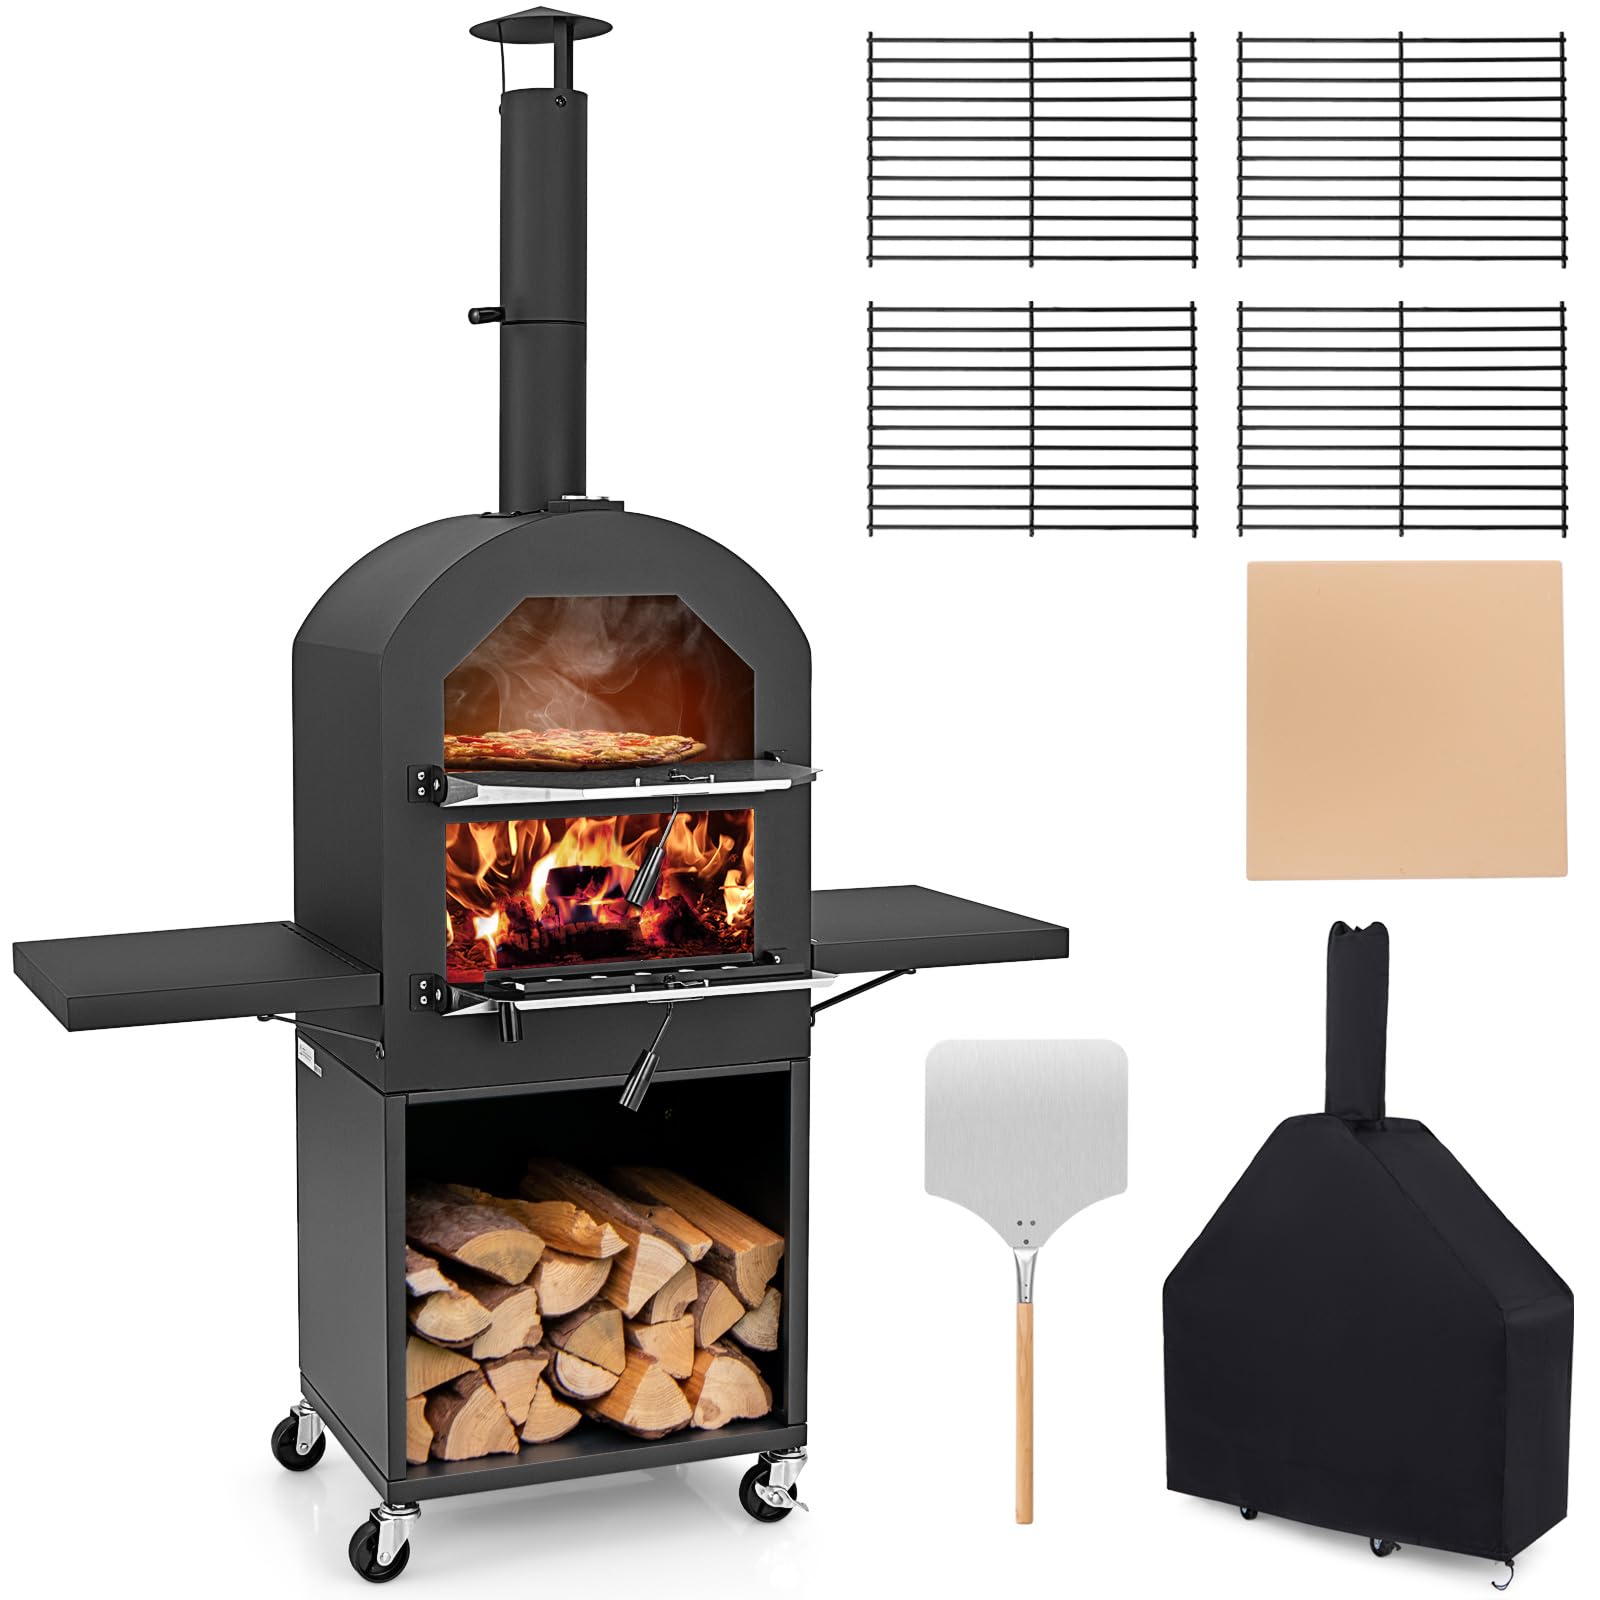 Giantex Pizza Oven Outdoor - Wood Fired Pizza Oven with 2 Side Tables